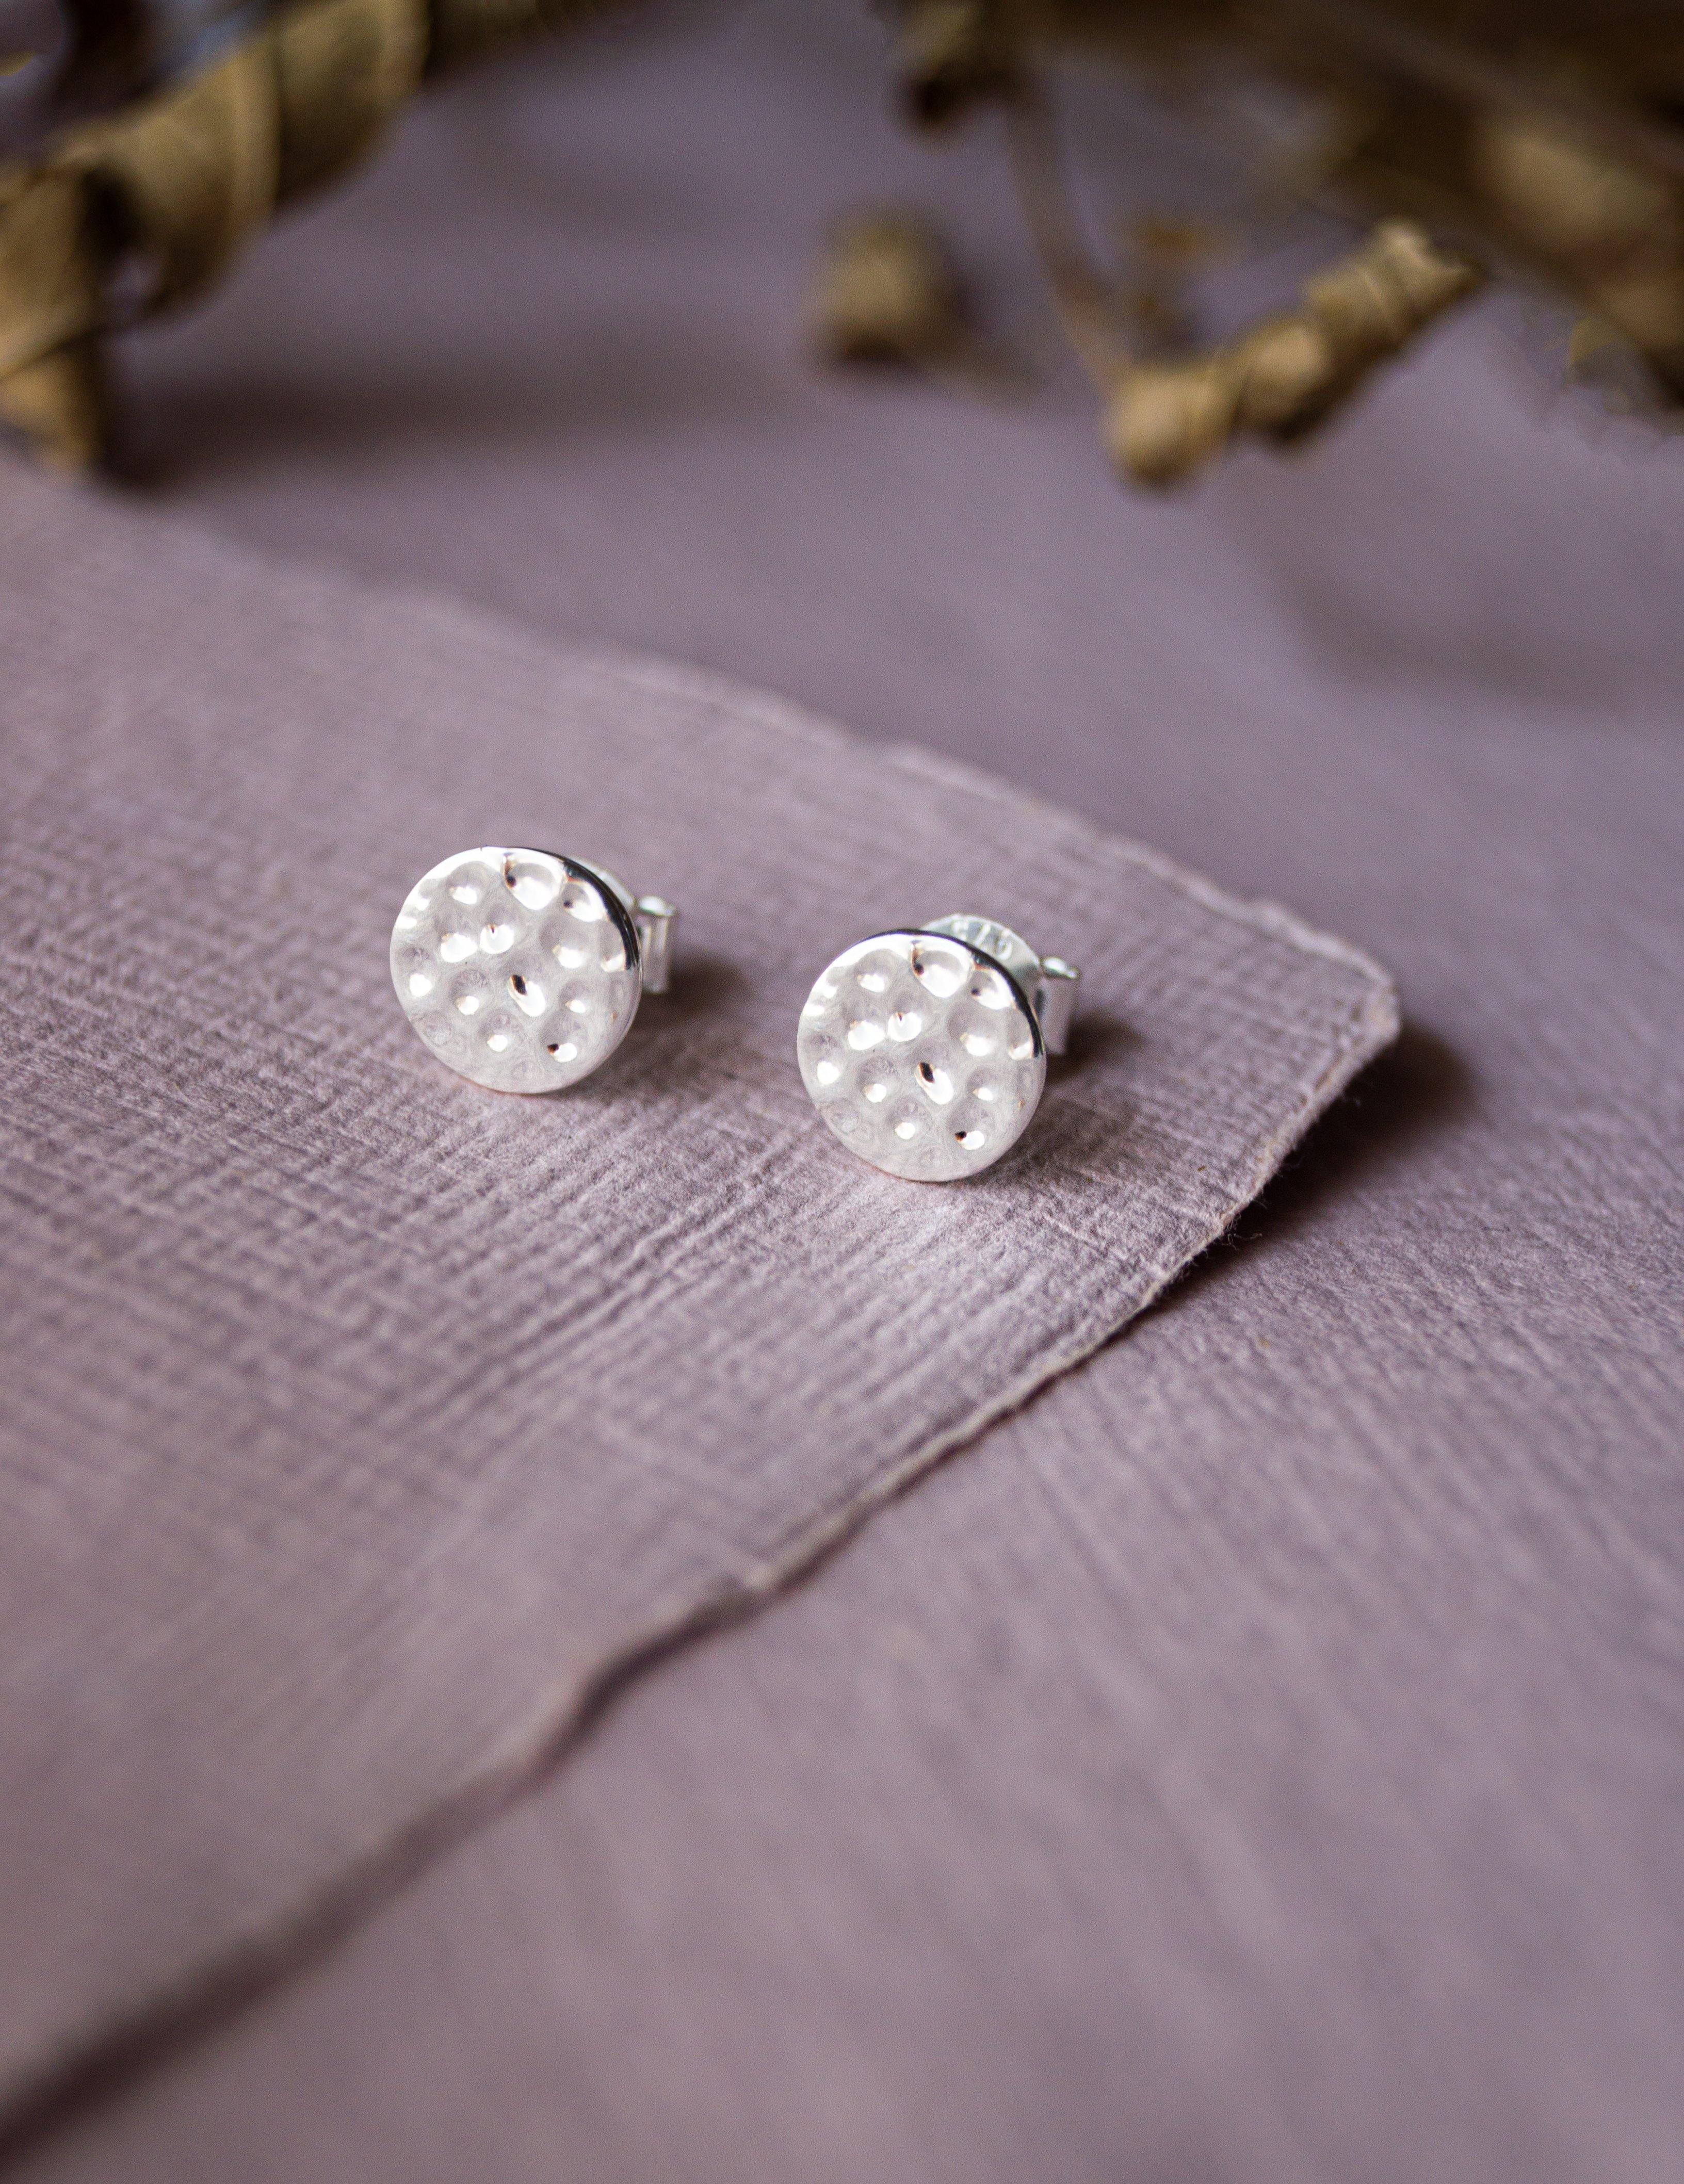 Gold Dipped Small Sterling Silver Ball Stud Earrings 2mm - 6mm & Packs |  Jewellerybox.co.uk